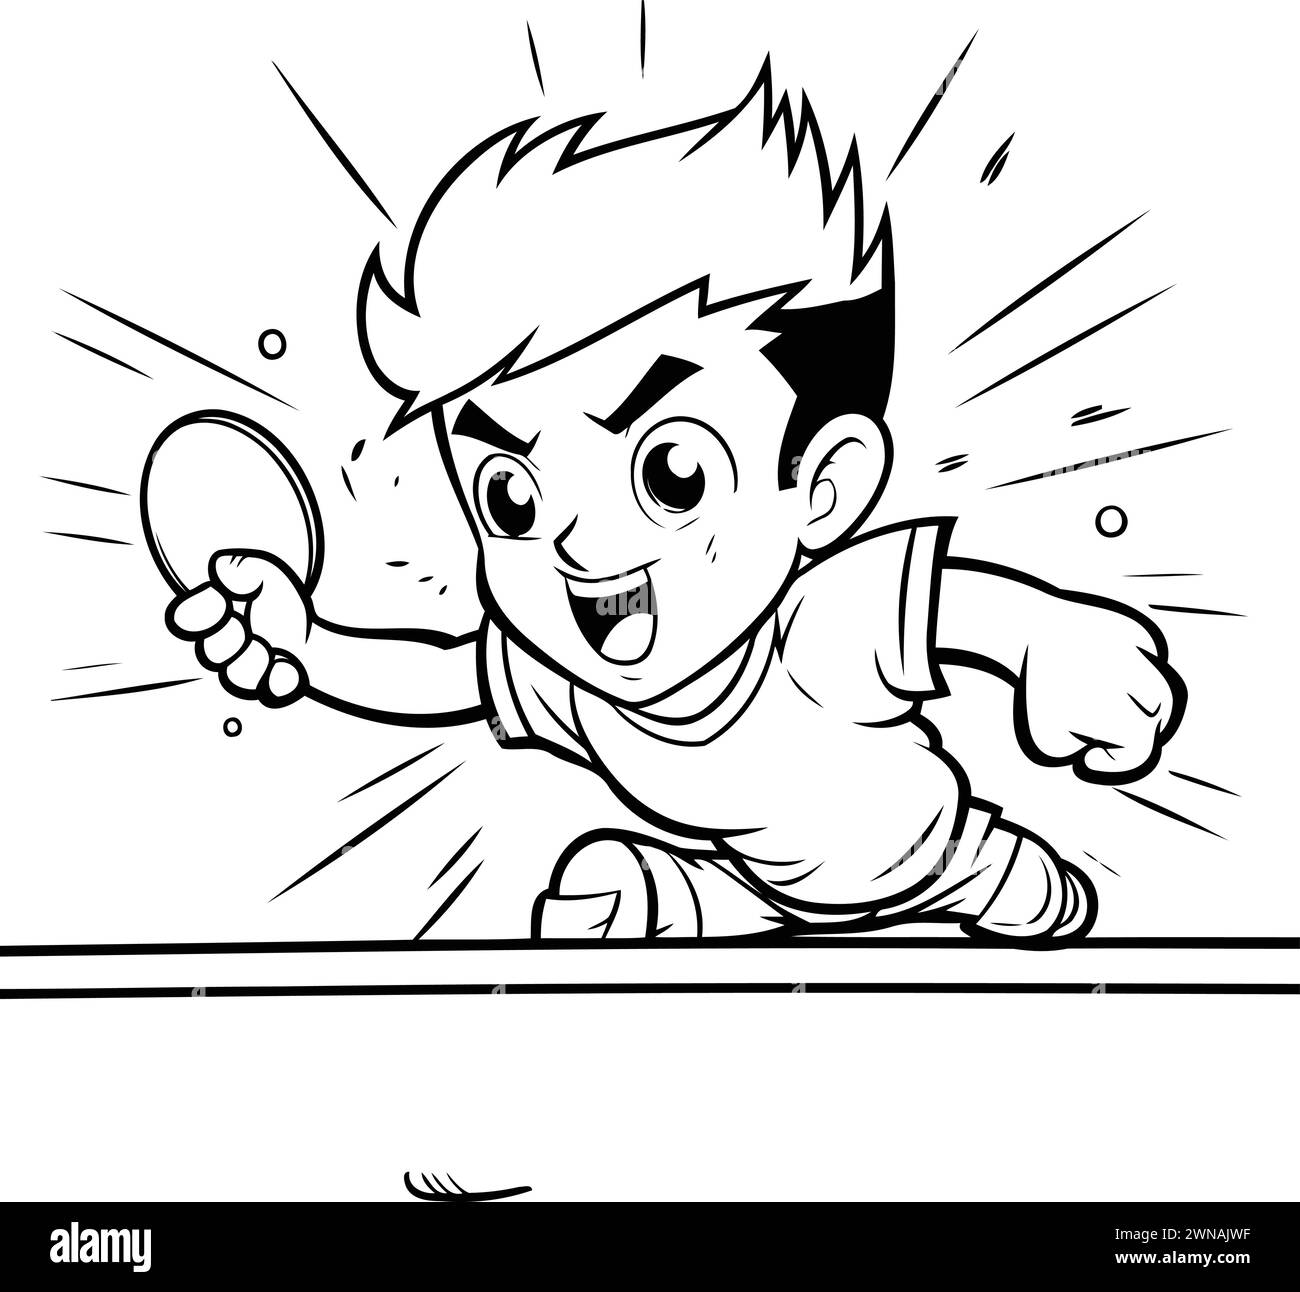 Boy playing table tennis - Black and White Cartoon Illustration. Vector Stock Vector